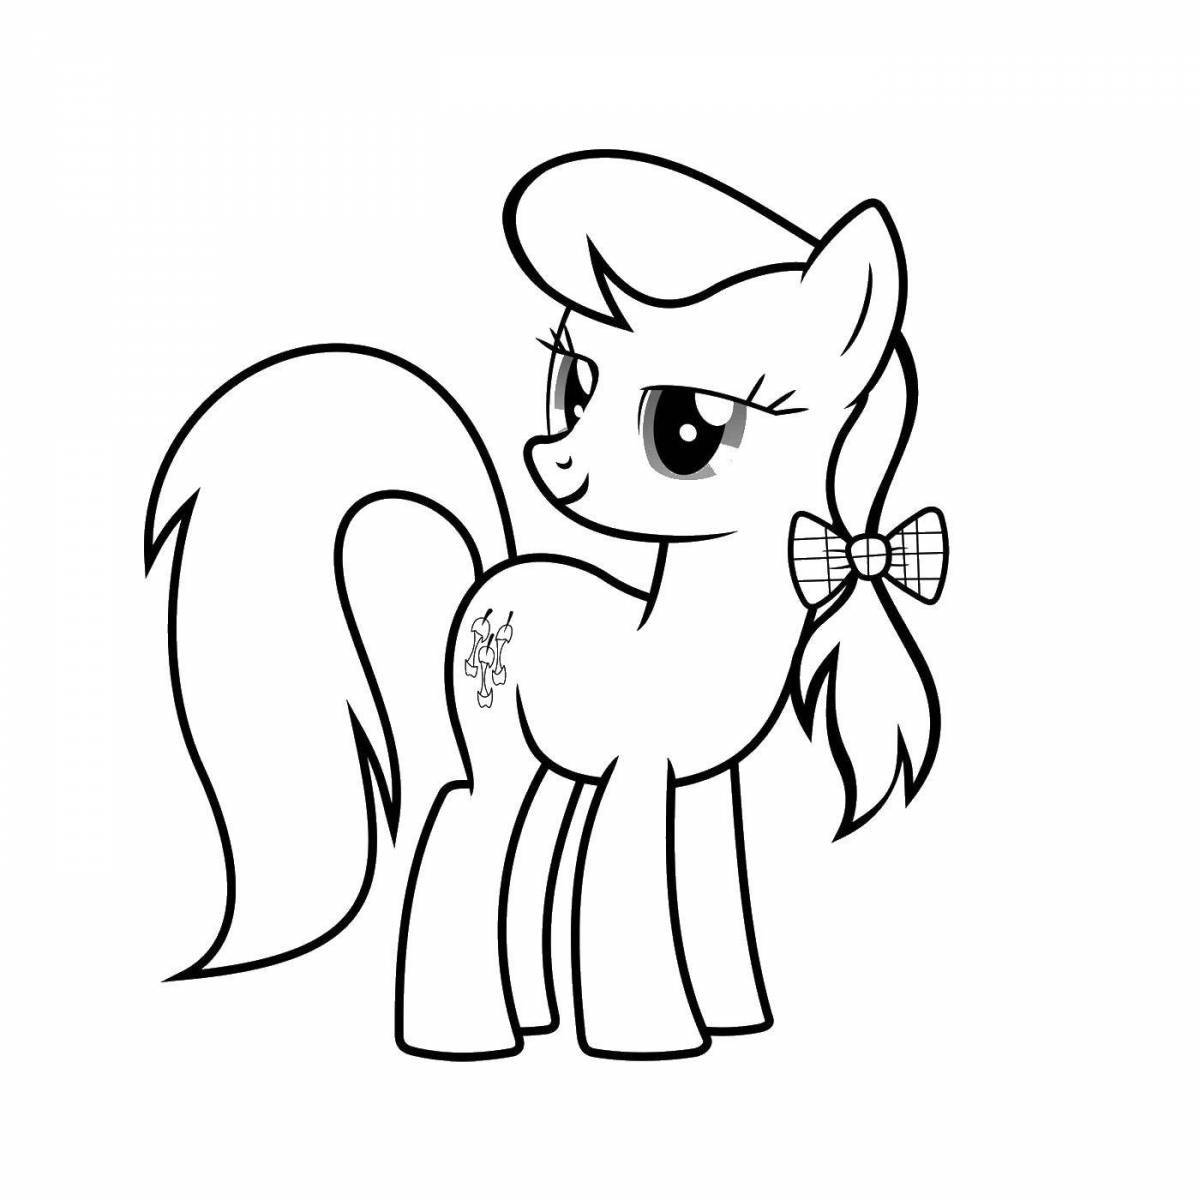 Cute pony coloring page